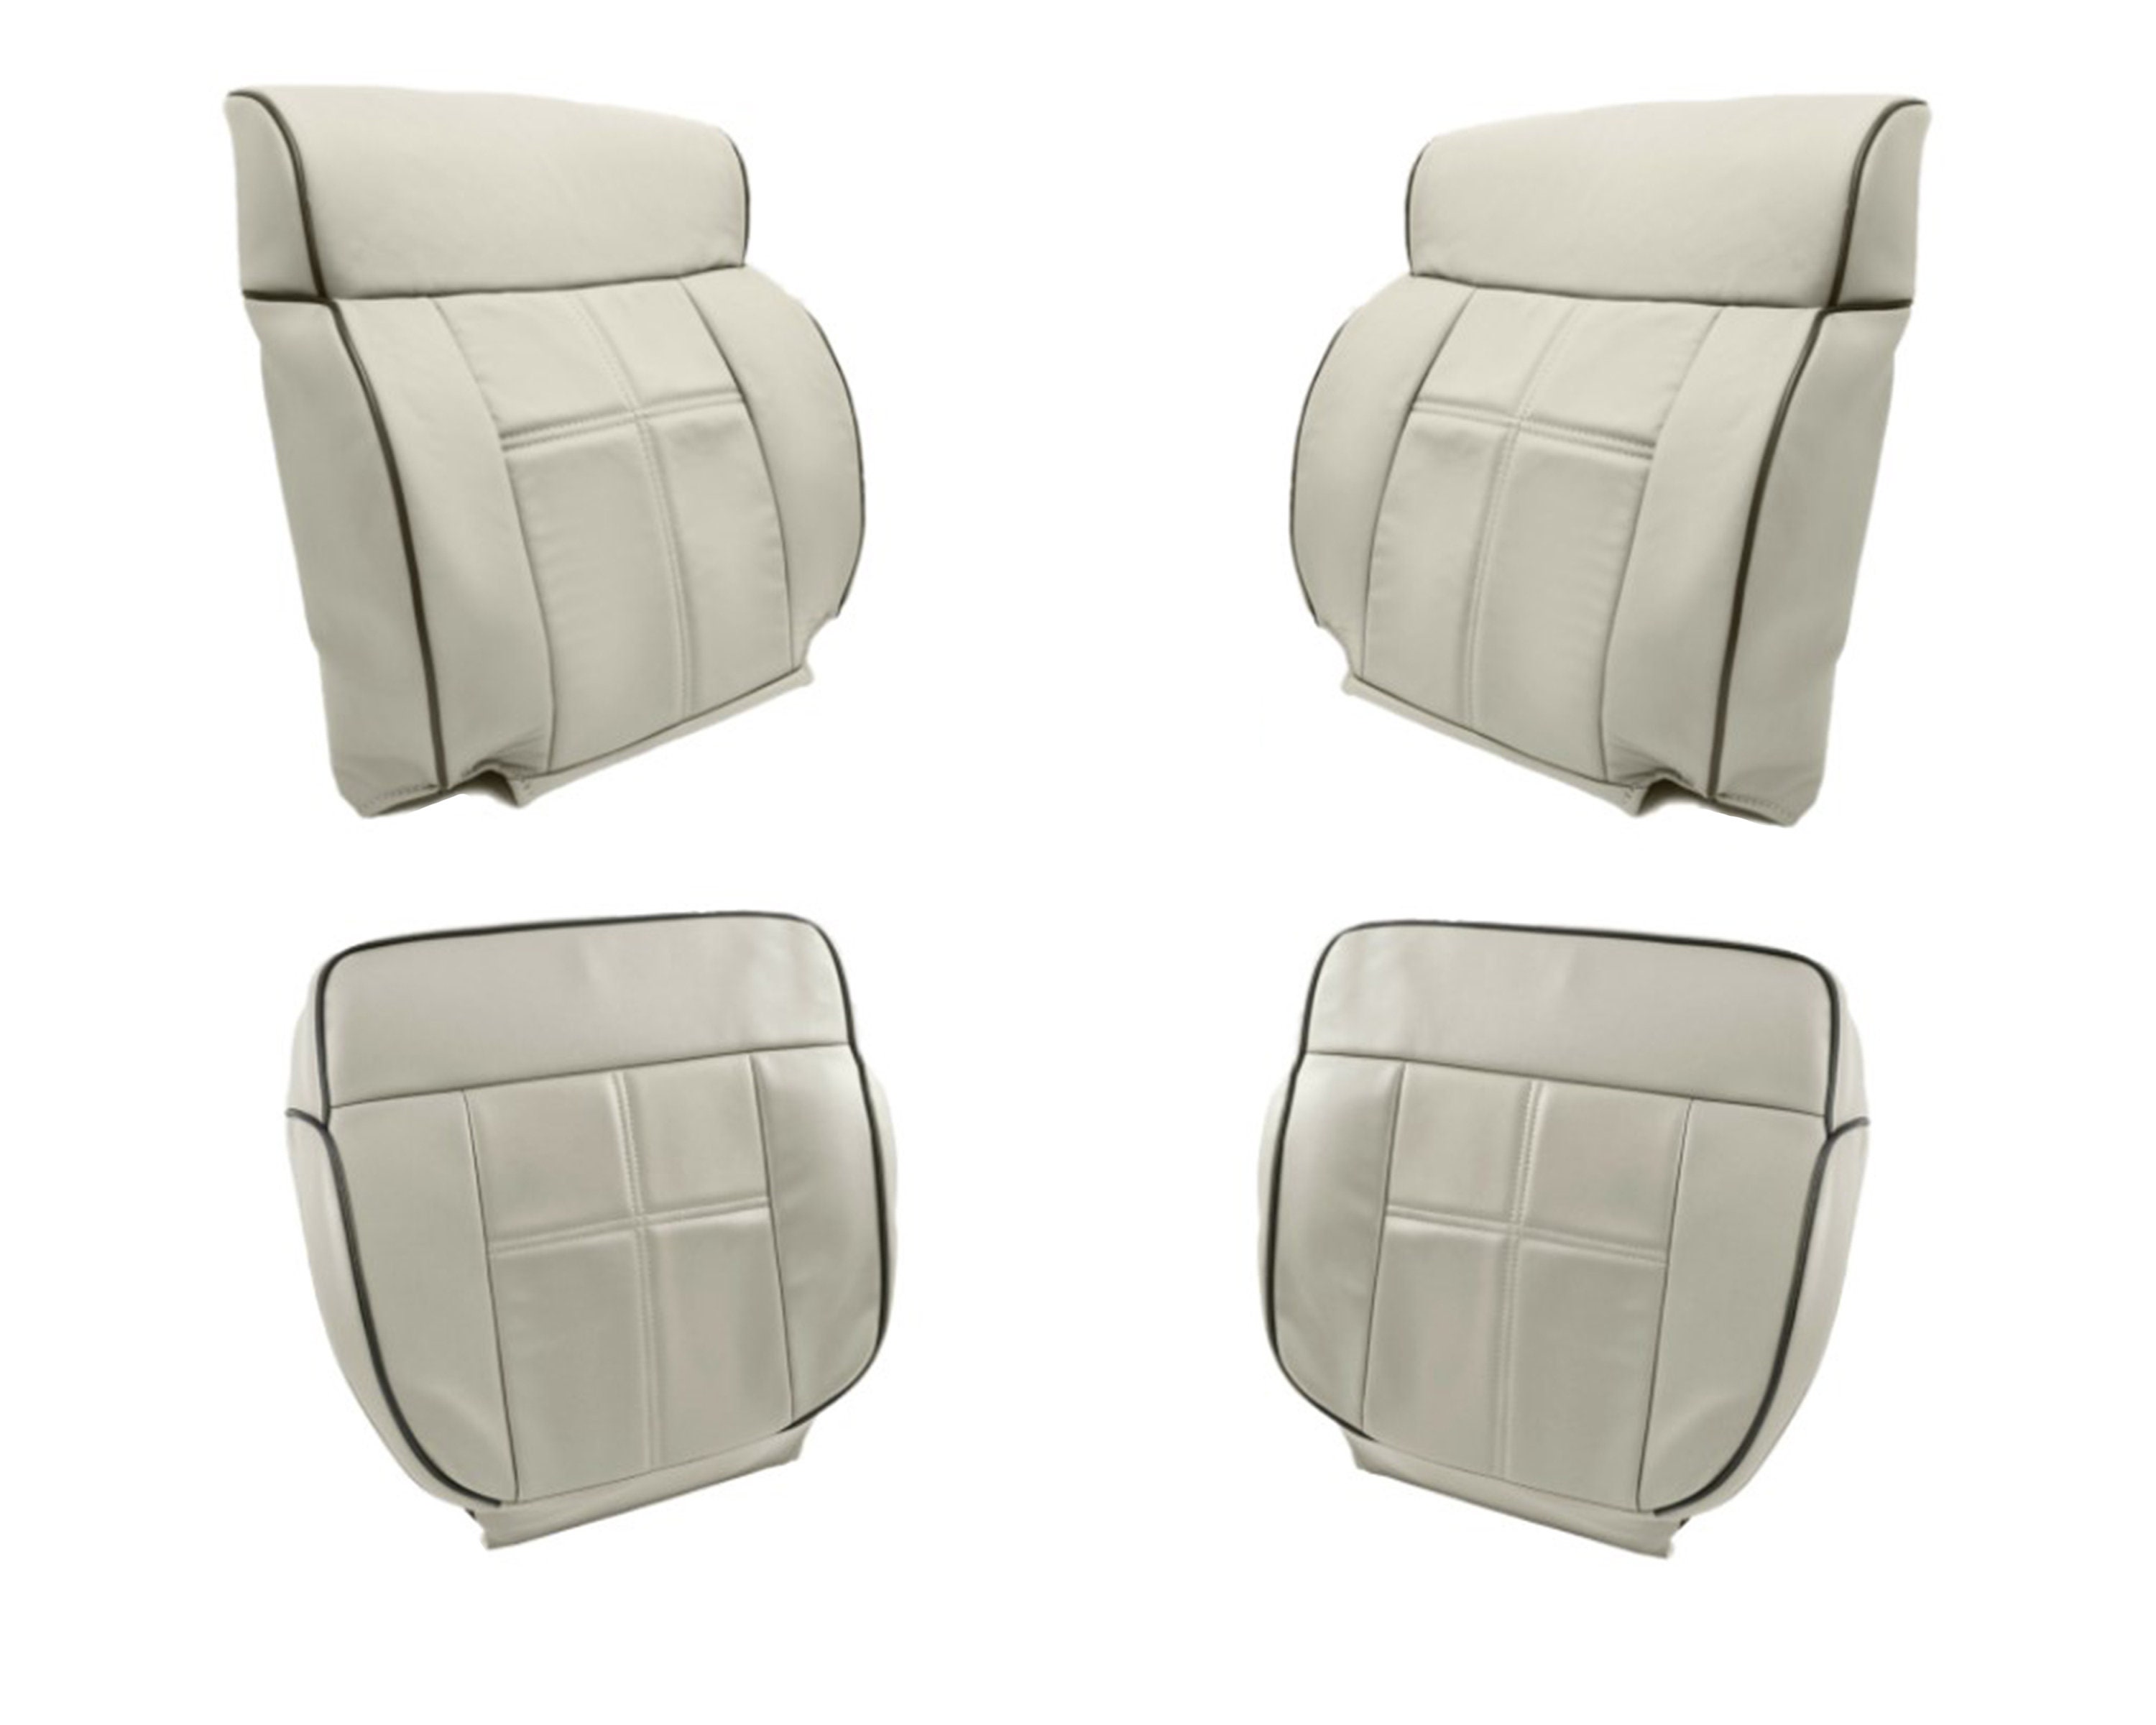 2007-2009 Lincoln MKZ Leather Seat Cover: Driver Side Complete, Light Tan  Perforated